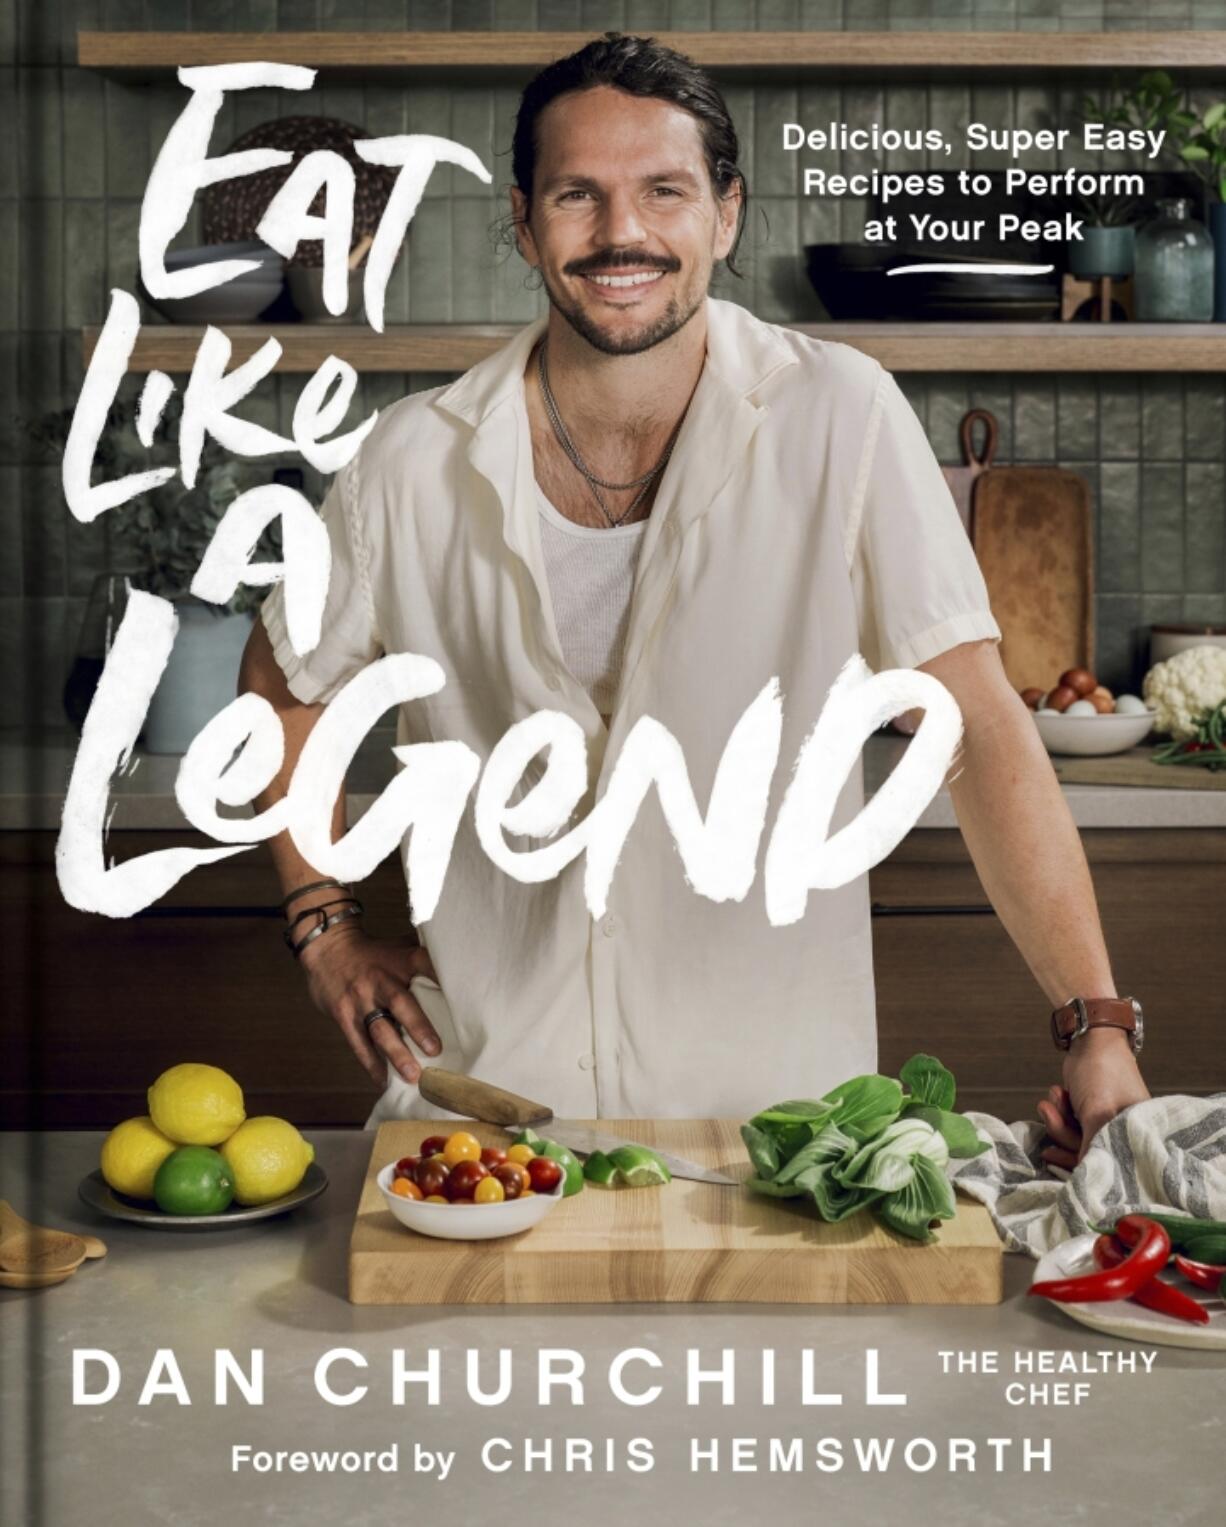 This cover image released by HarperOne shows &ldquo;Eat Like a Legend&rdquo; by Dan Churchill, a chef and performance trainer whose celebrity clients have included Chris Hemsworth. Churchill advises adapting macaroni and cheese to include chopped broccoli and spinach, whole wheat pasta and olive oil instead of the traditional butter.